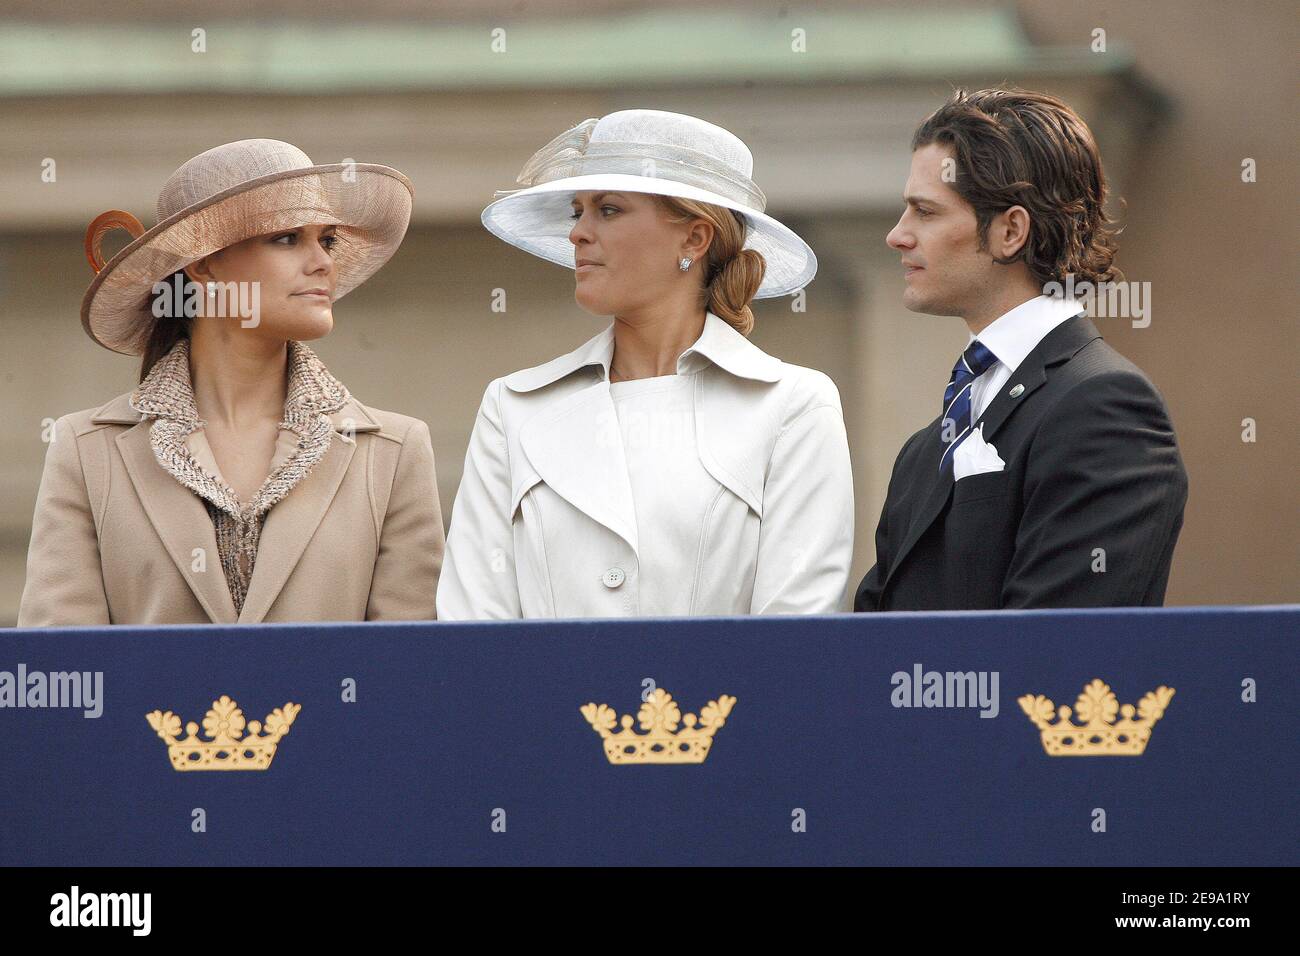 Crown princess Victoria, princess Madeleine and prince Carl Philip during the celebration of the 60th Birthday of Carl XVI Gustaf of Sweden in Lejonbacken Royal Palace on April 30, 2006. Photo by Nebinger/Orban/ABACAPRESS.COM Stock Photo